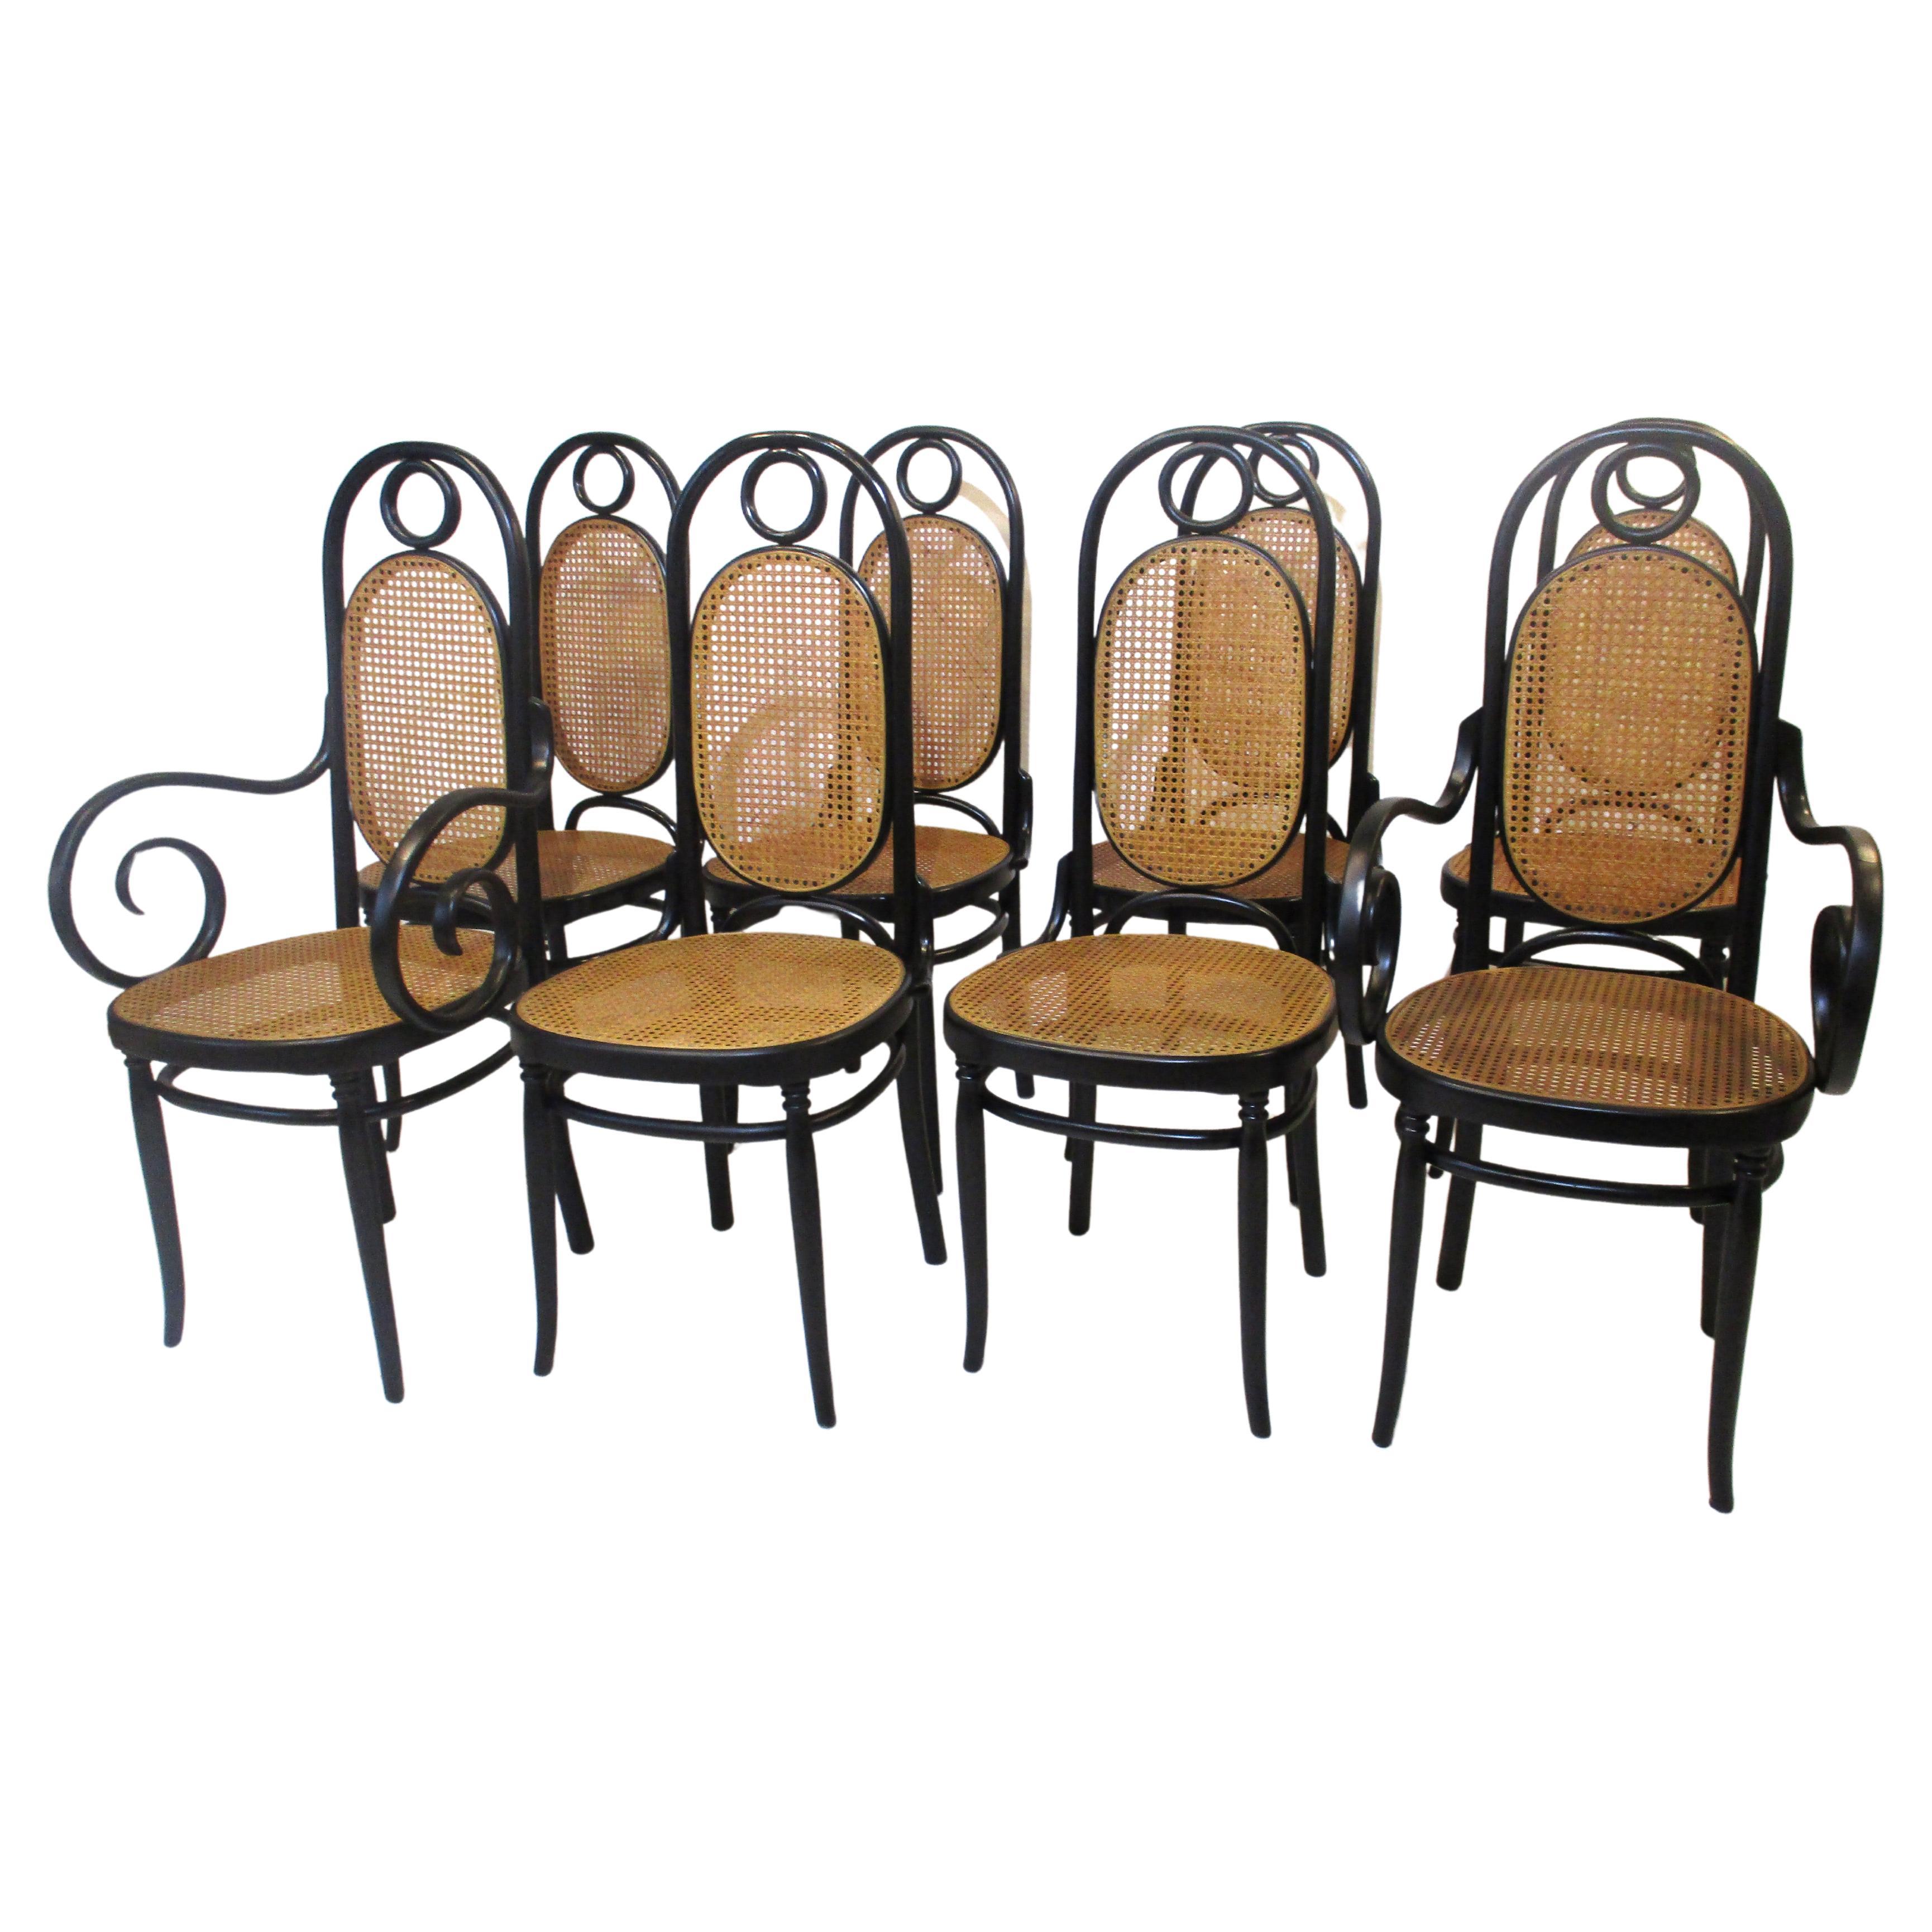 8 Thonet Bentwood / Cane Dining Chairs For Sale